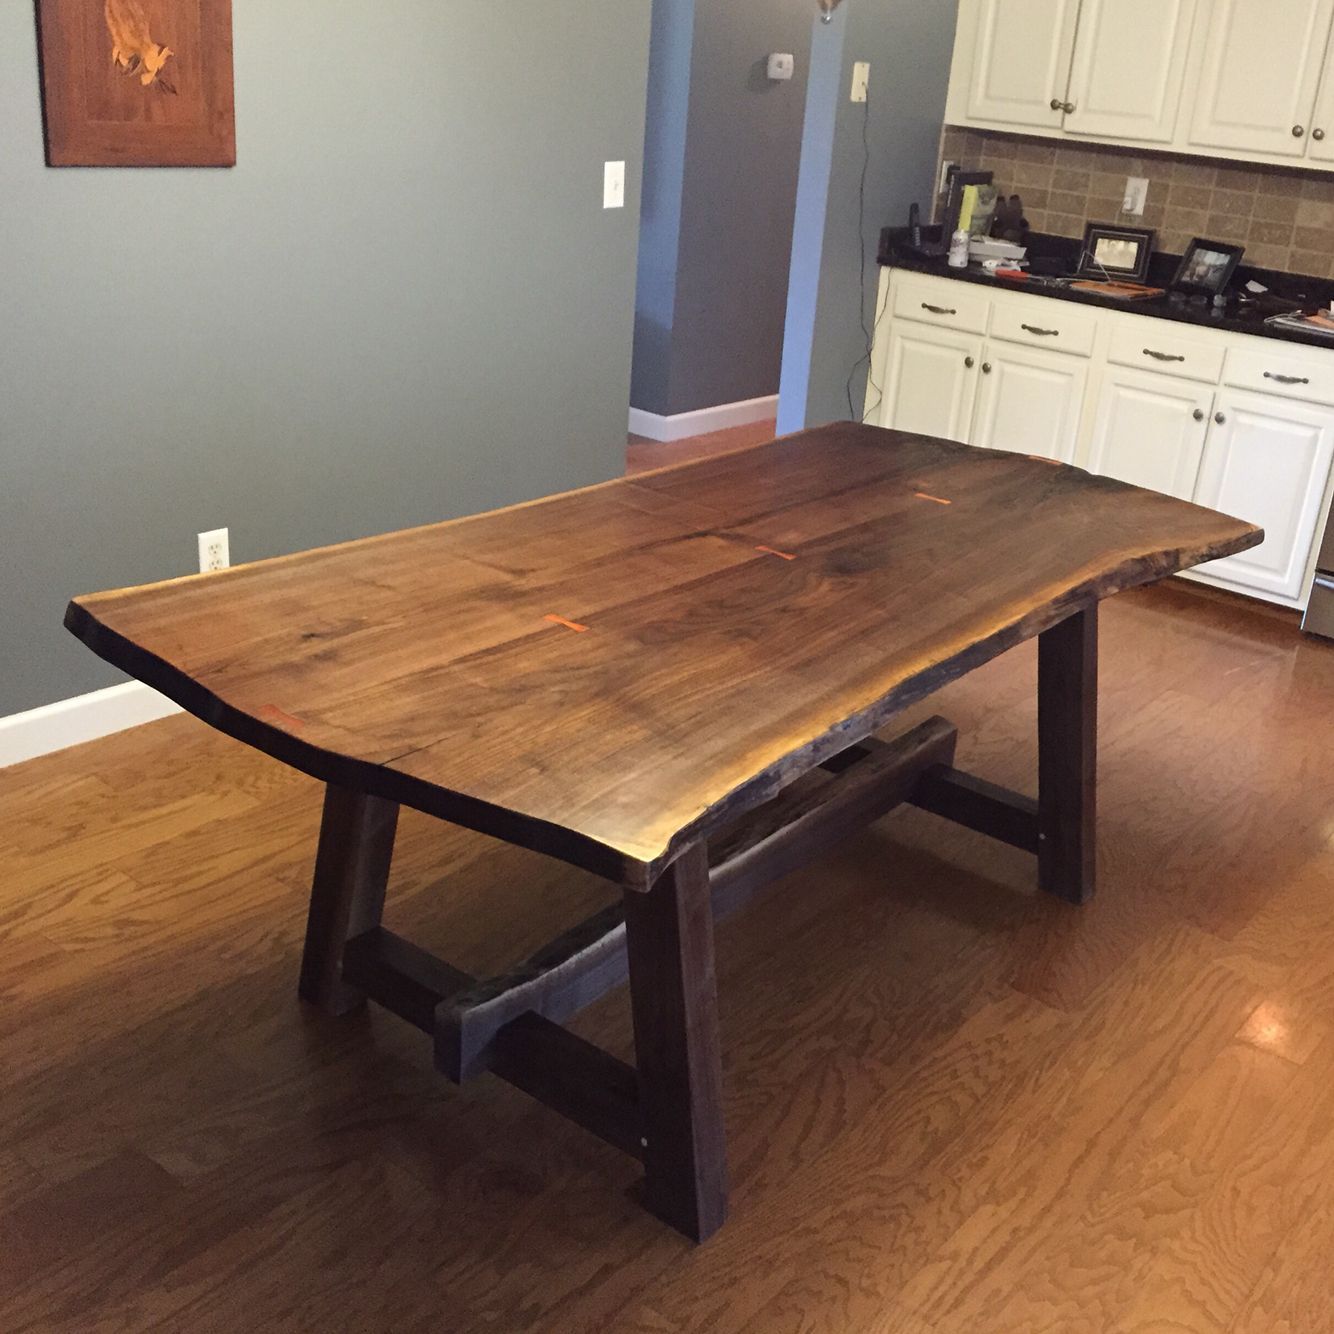 Live Edge Walnut Dining Table | Furniture In 2019 | Walnut Inside Most Recent Herran Dining Tables (View 2 of 25)